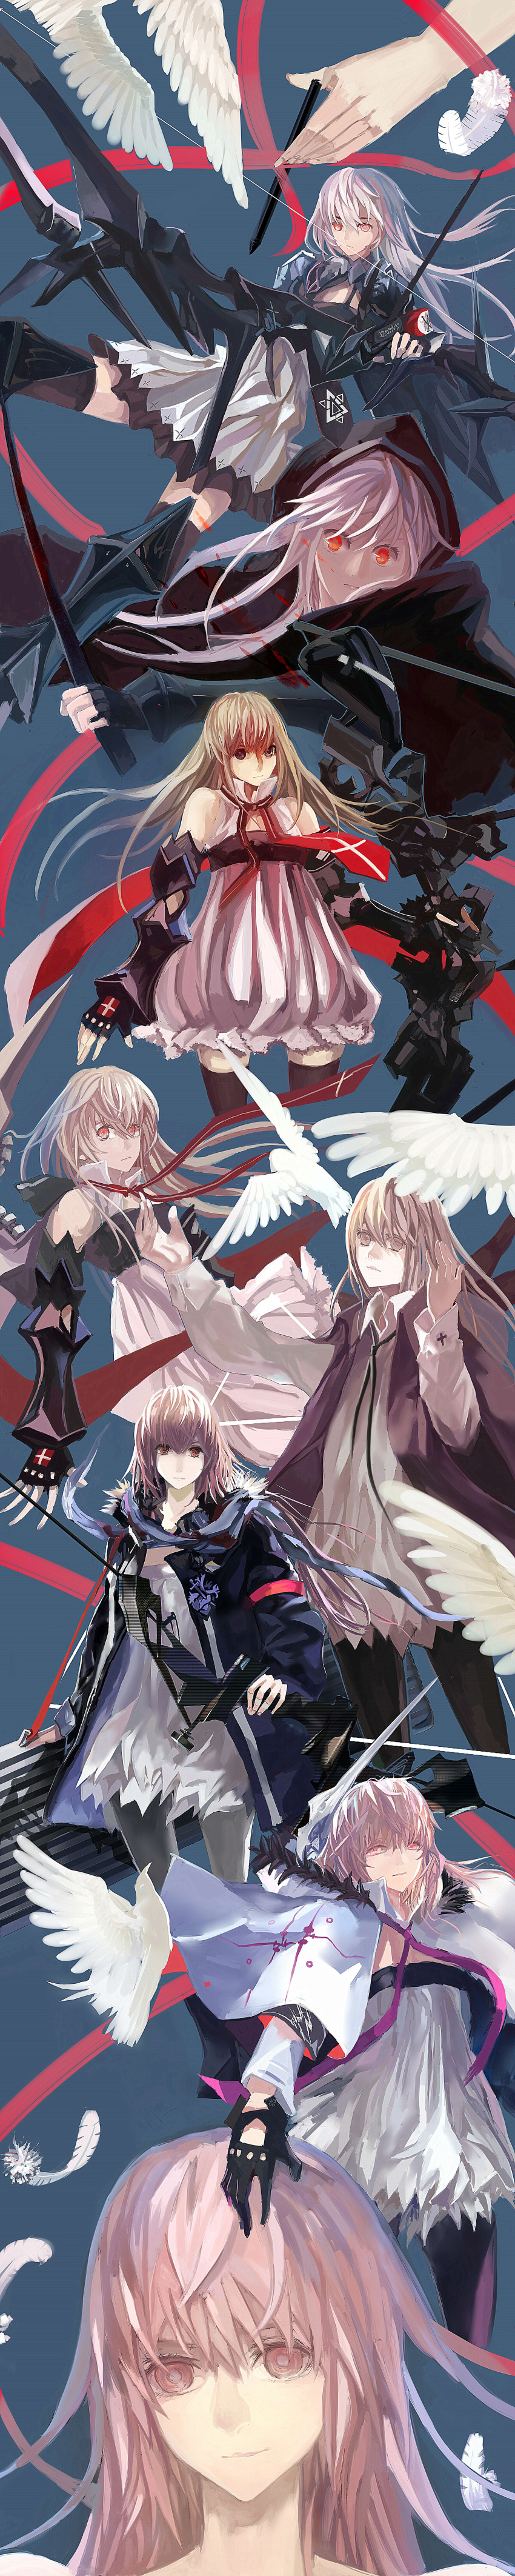 4girls absurdres angel_wings armor bangs berlinetta_(pixiv_fantasia) black_thighhighs blue_background borrowed_character bow_(weapon) commentary disembodied_limb dress feathers highres holding holding_bow_(weapon) holding_weapon incredibly_absurdres long_hair multiple_girls multiple_persona multiple_views pink_eyes pink_hair pixiv_fantasia pixiv_fantasia_5 pixiv_fantasia_fallen_kings pixiv_fantasia_new_world pixiv_fantasia_sword_regalia reiichiko simple_background sleeveless sleeveless_dress strapless strapless_dress string string_of_fate striped striped_background stylus tall_image thighhighs weapon weapon_case white_dress wings